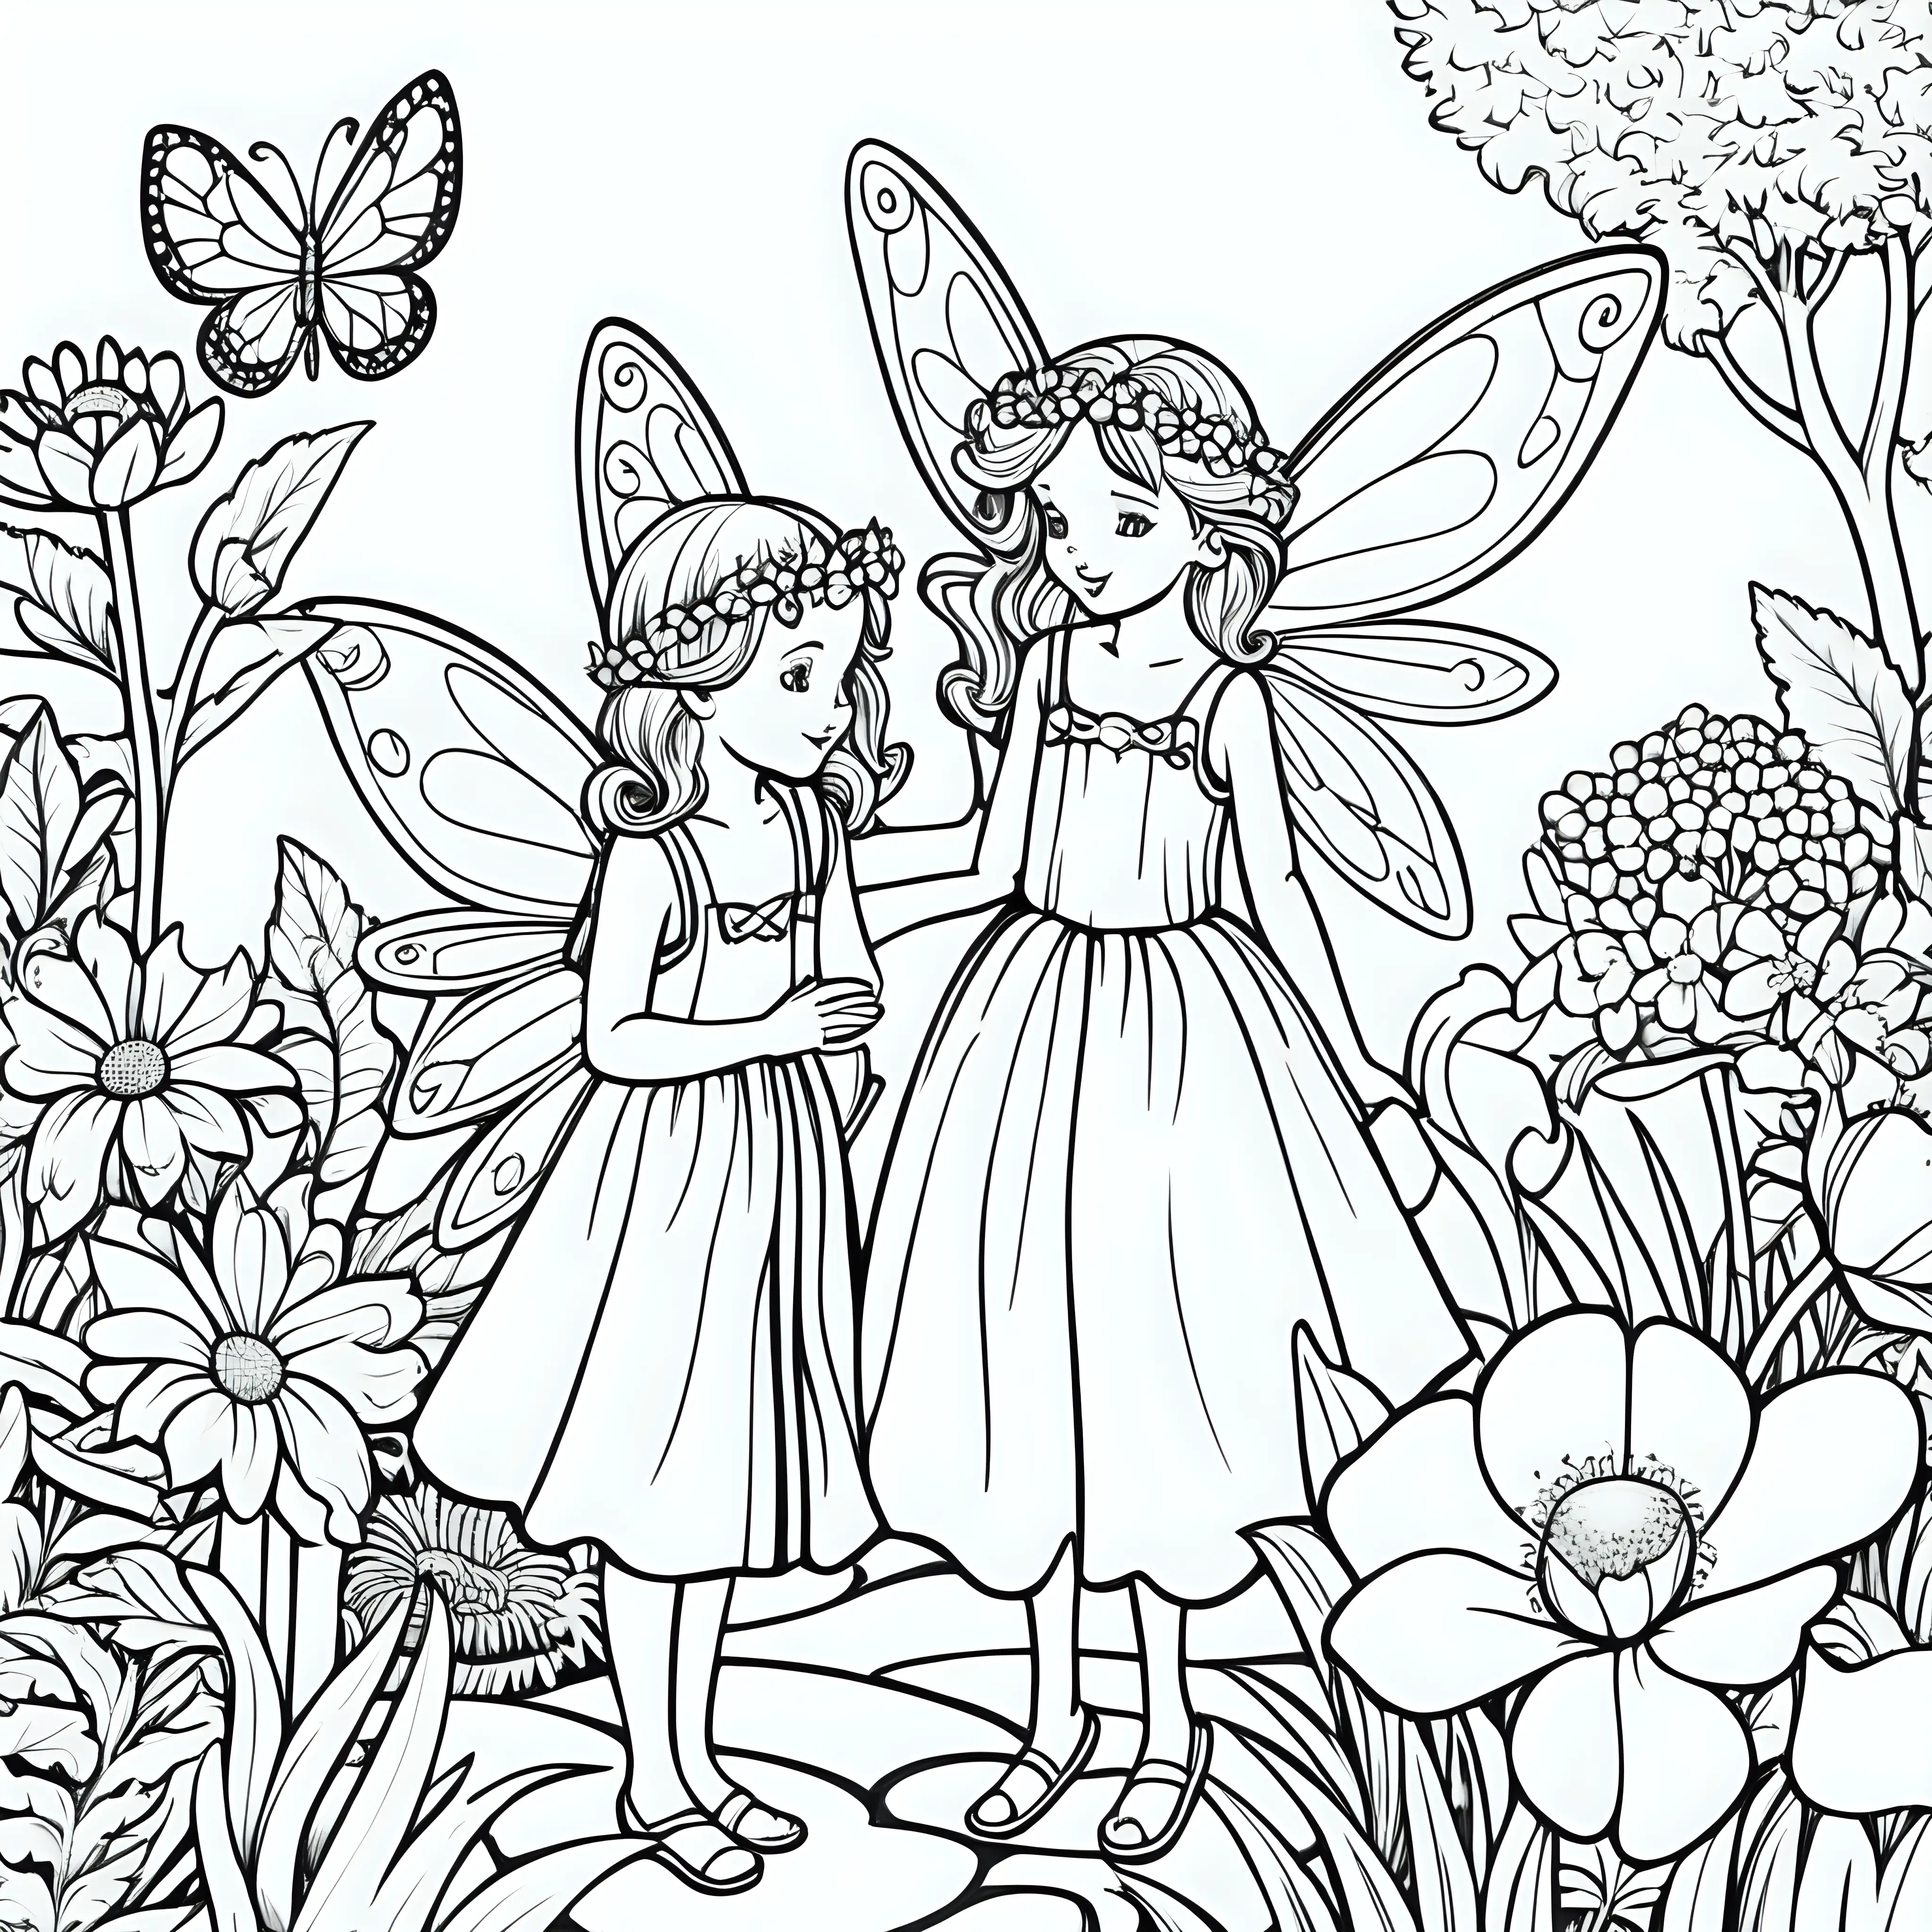 Simple black line fairy's in a garden children's colouring page